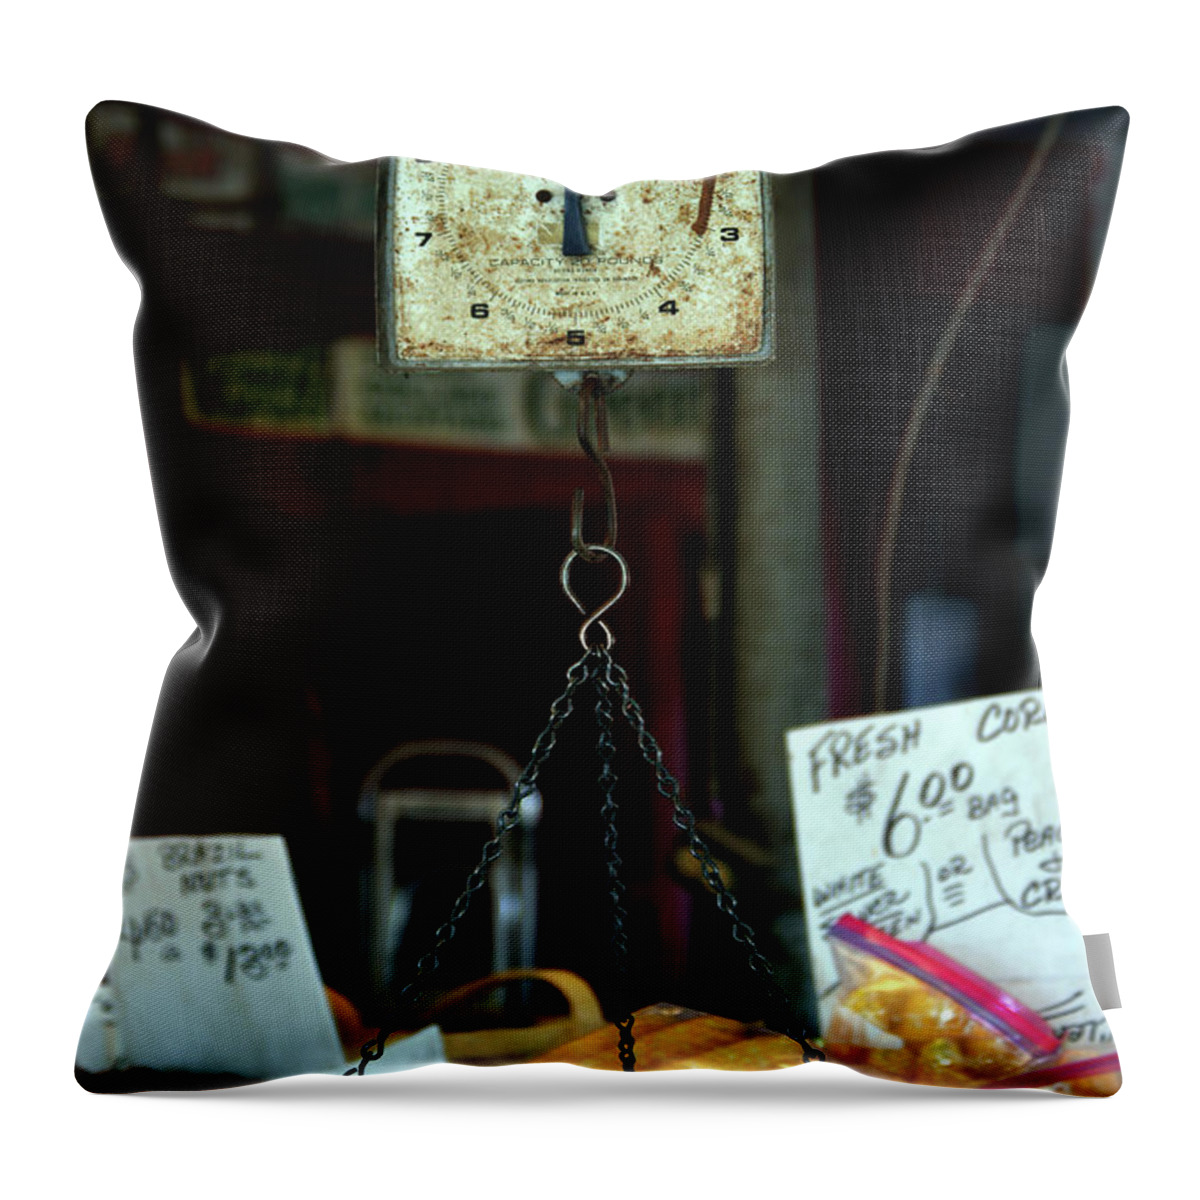 Scale Throw Pillow featuring the photograph Vintage Hanson Scale Model 842 by Lesa Fine